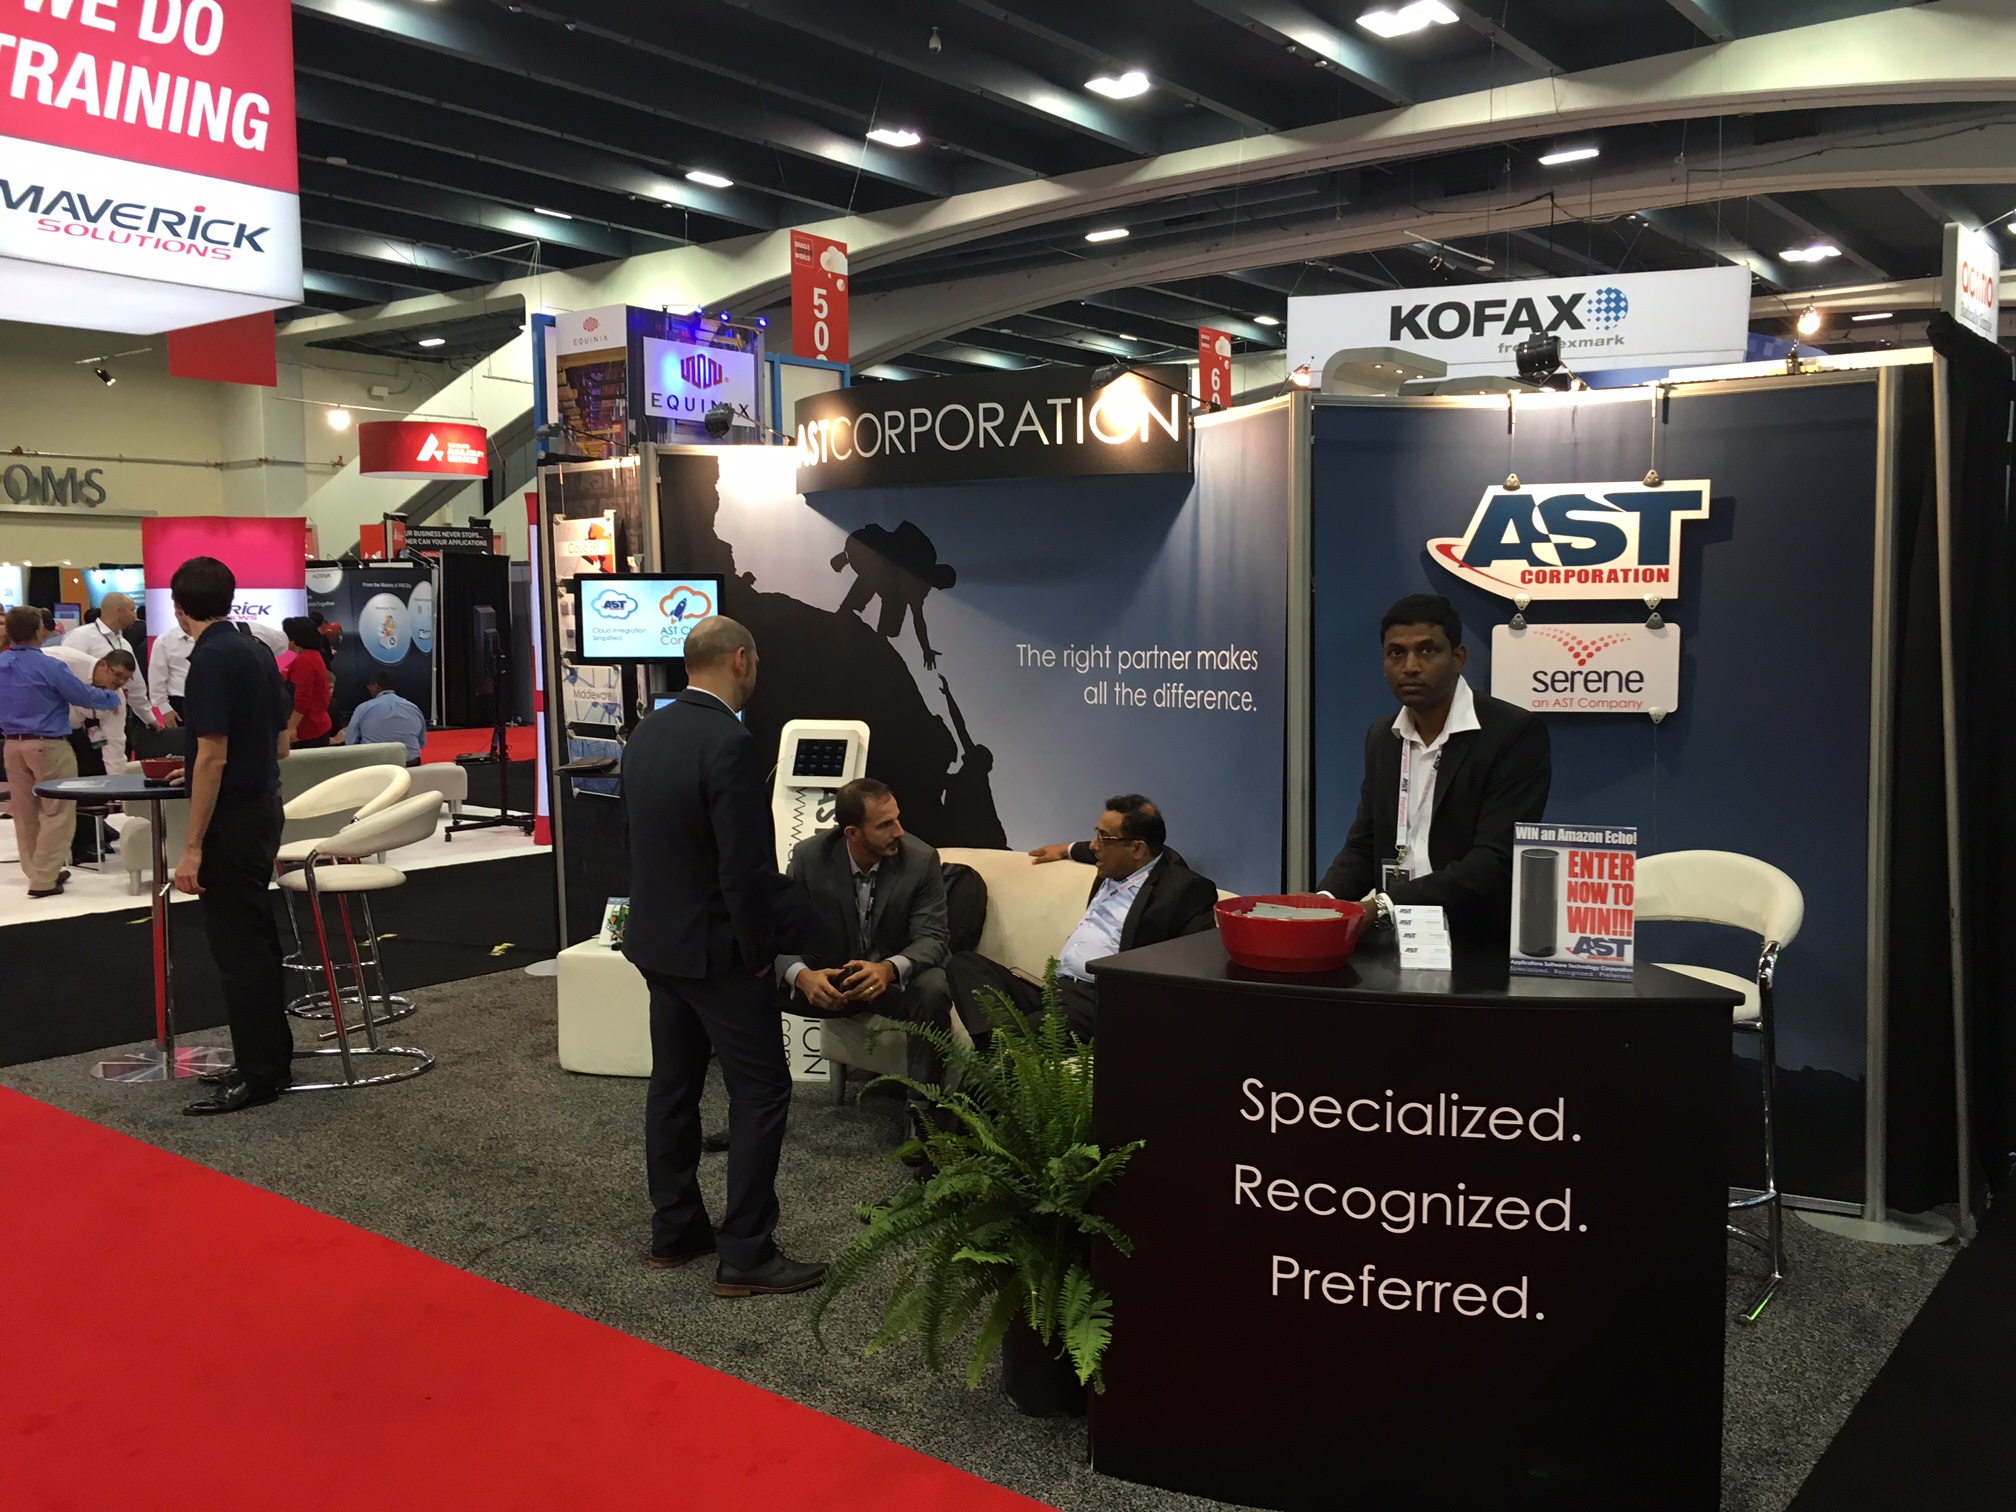 Visit Team AST at OOW Booth 309 and Win Big!